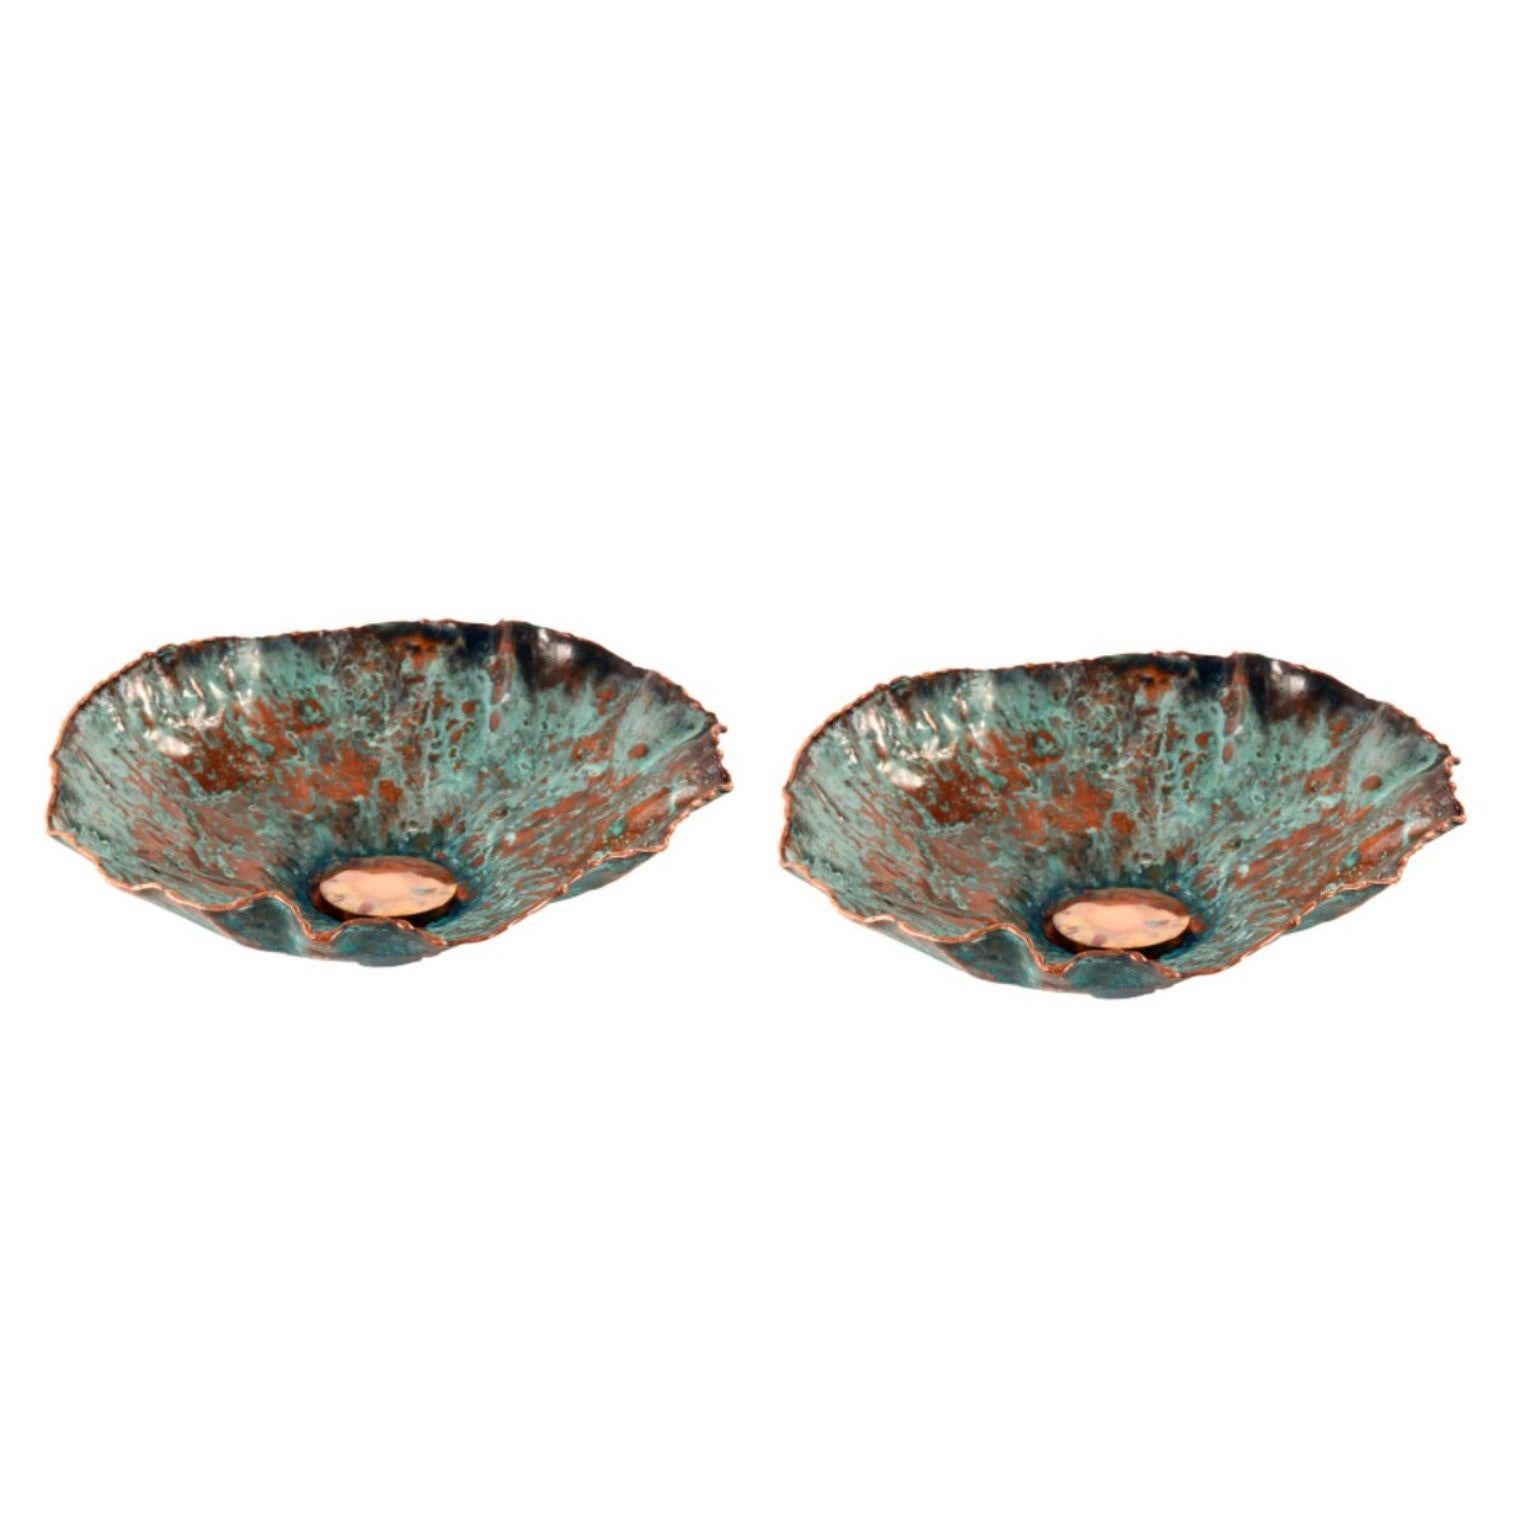 Set of 2 Hypomea copper bowls by Samuel Costantini.
Dimensions: D 25 x H 8 cm.
Materials: copper.

Copper bowl worked en-rely by hand.
The oxydation of copper is realized only with natural product.
Limited editon of 9 numerated